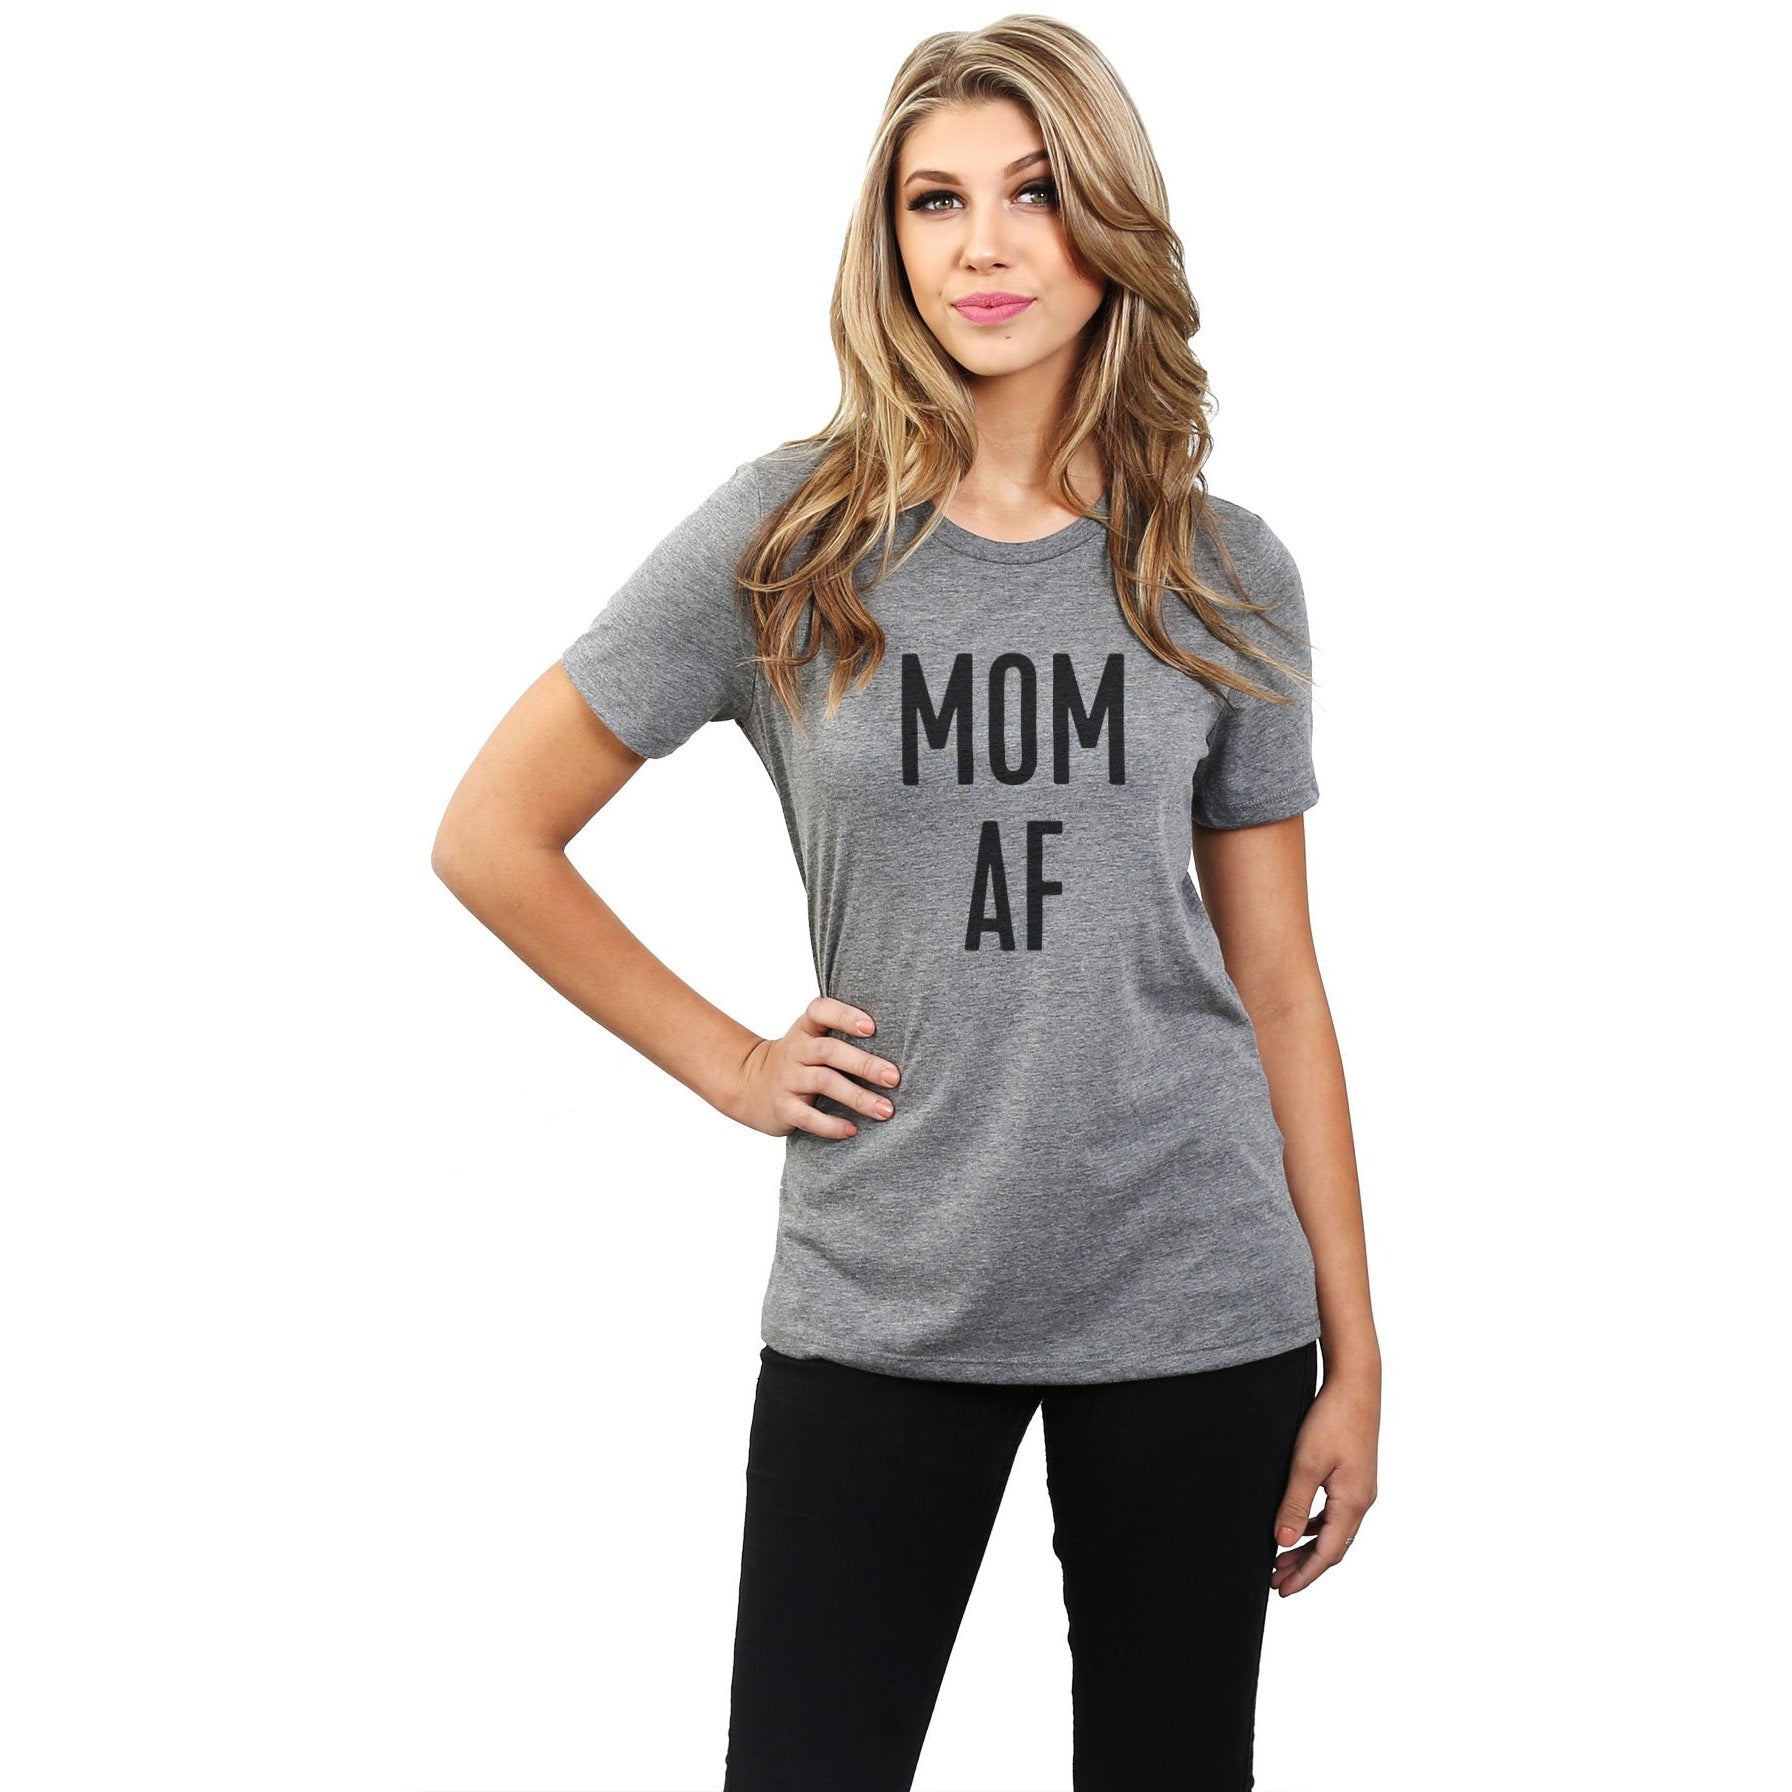 Mom AF Women's Relaxed Crewneck T-Shirt Top Tee Heather Grey Model
